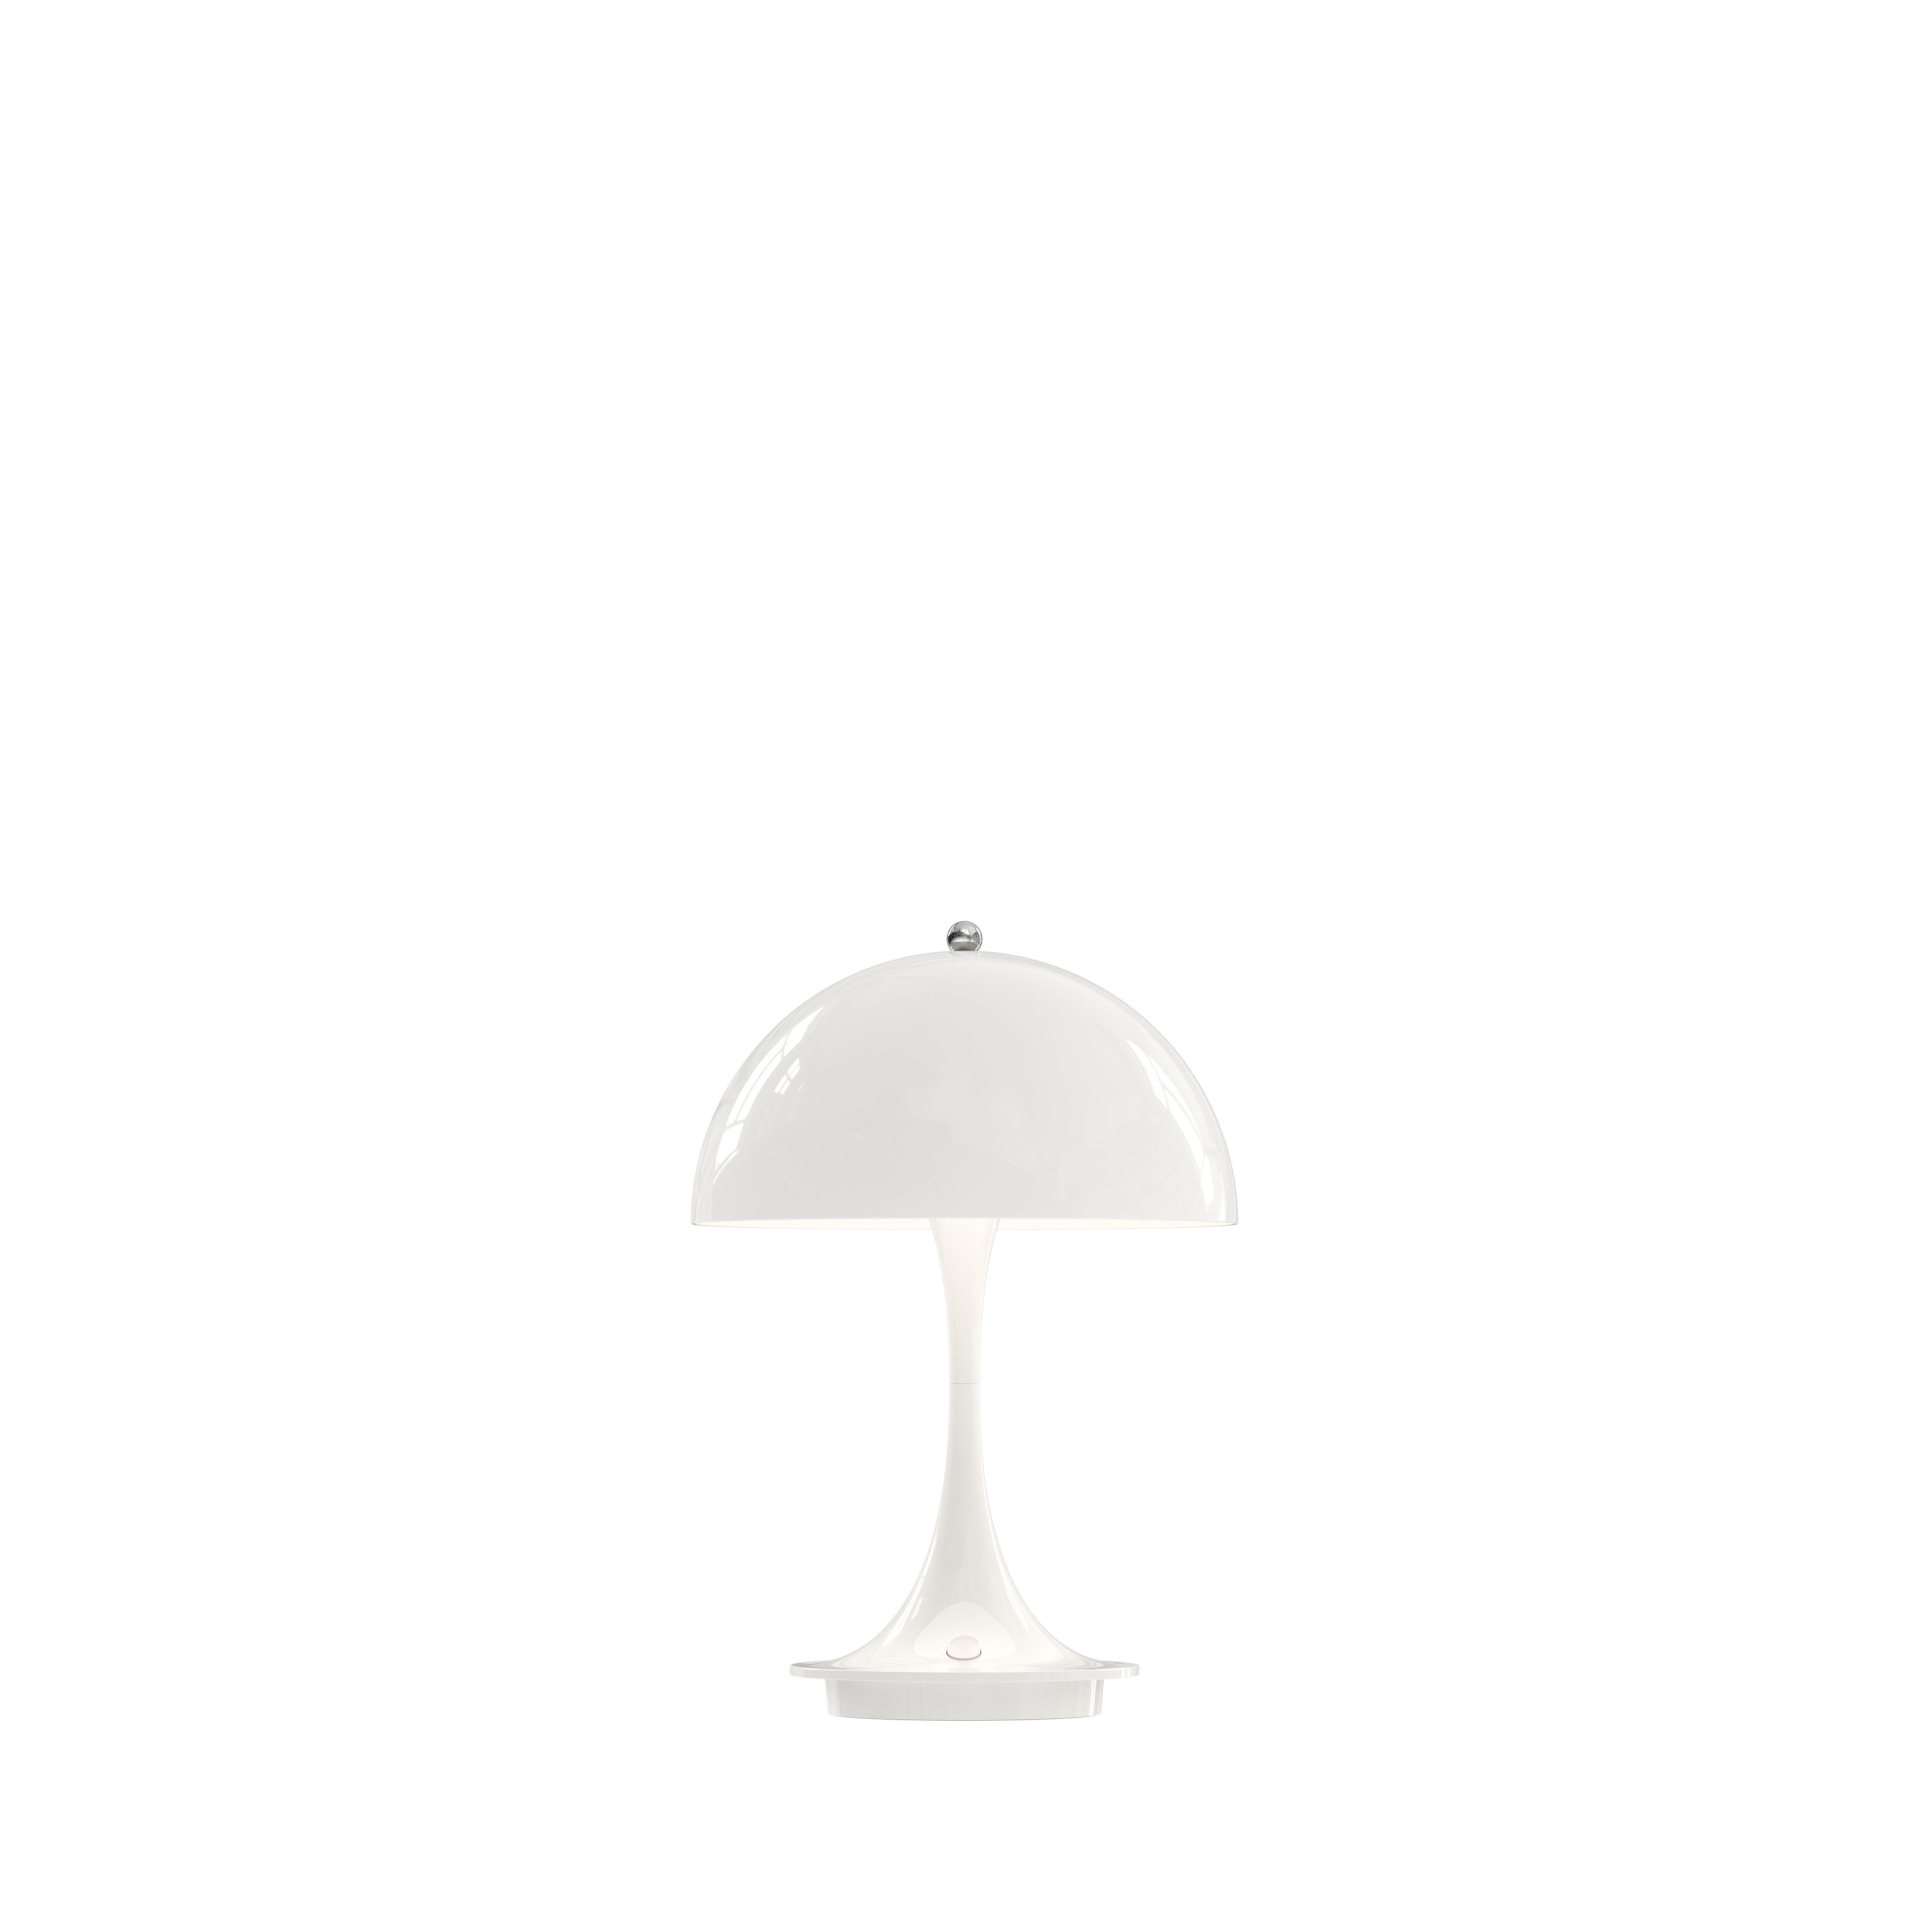 Originally designed in 1971, the Panthella has since become recognised as one of Verner Panton's most significant designs. The recognisable, soft organic shape of the table lamp is not only beautiful but also functional, with a hemispherical shade